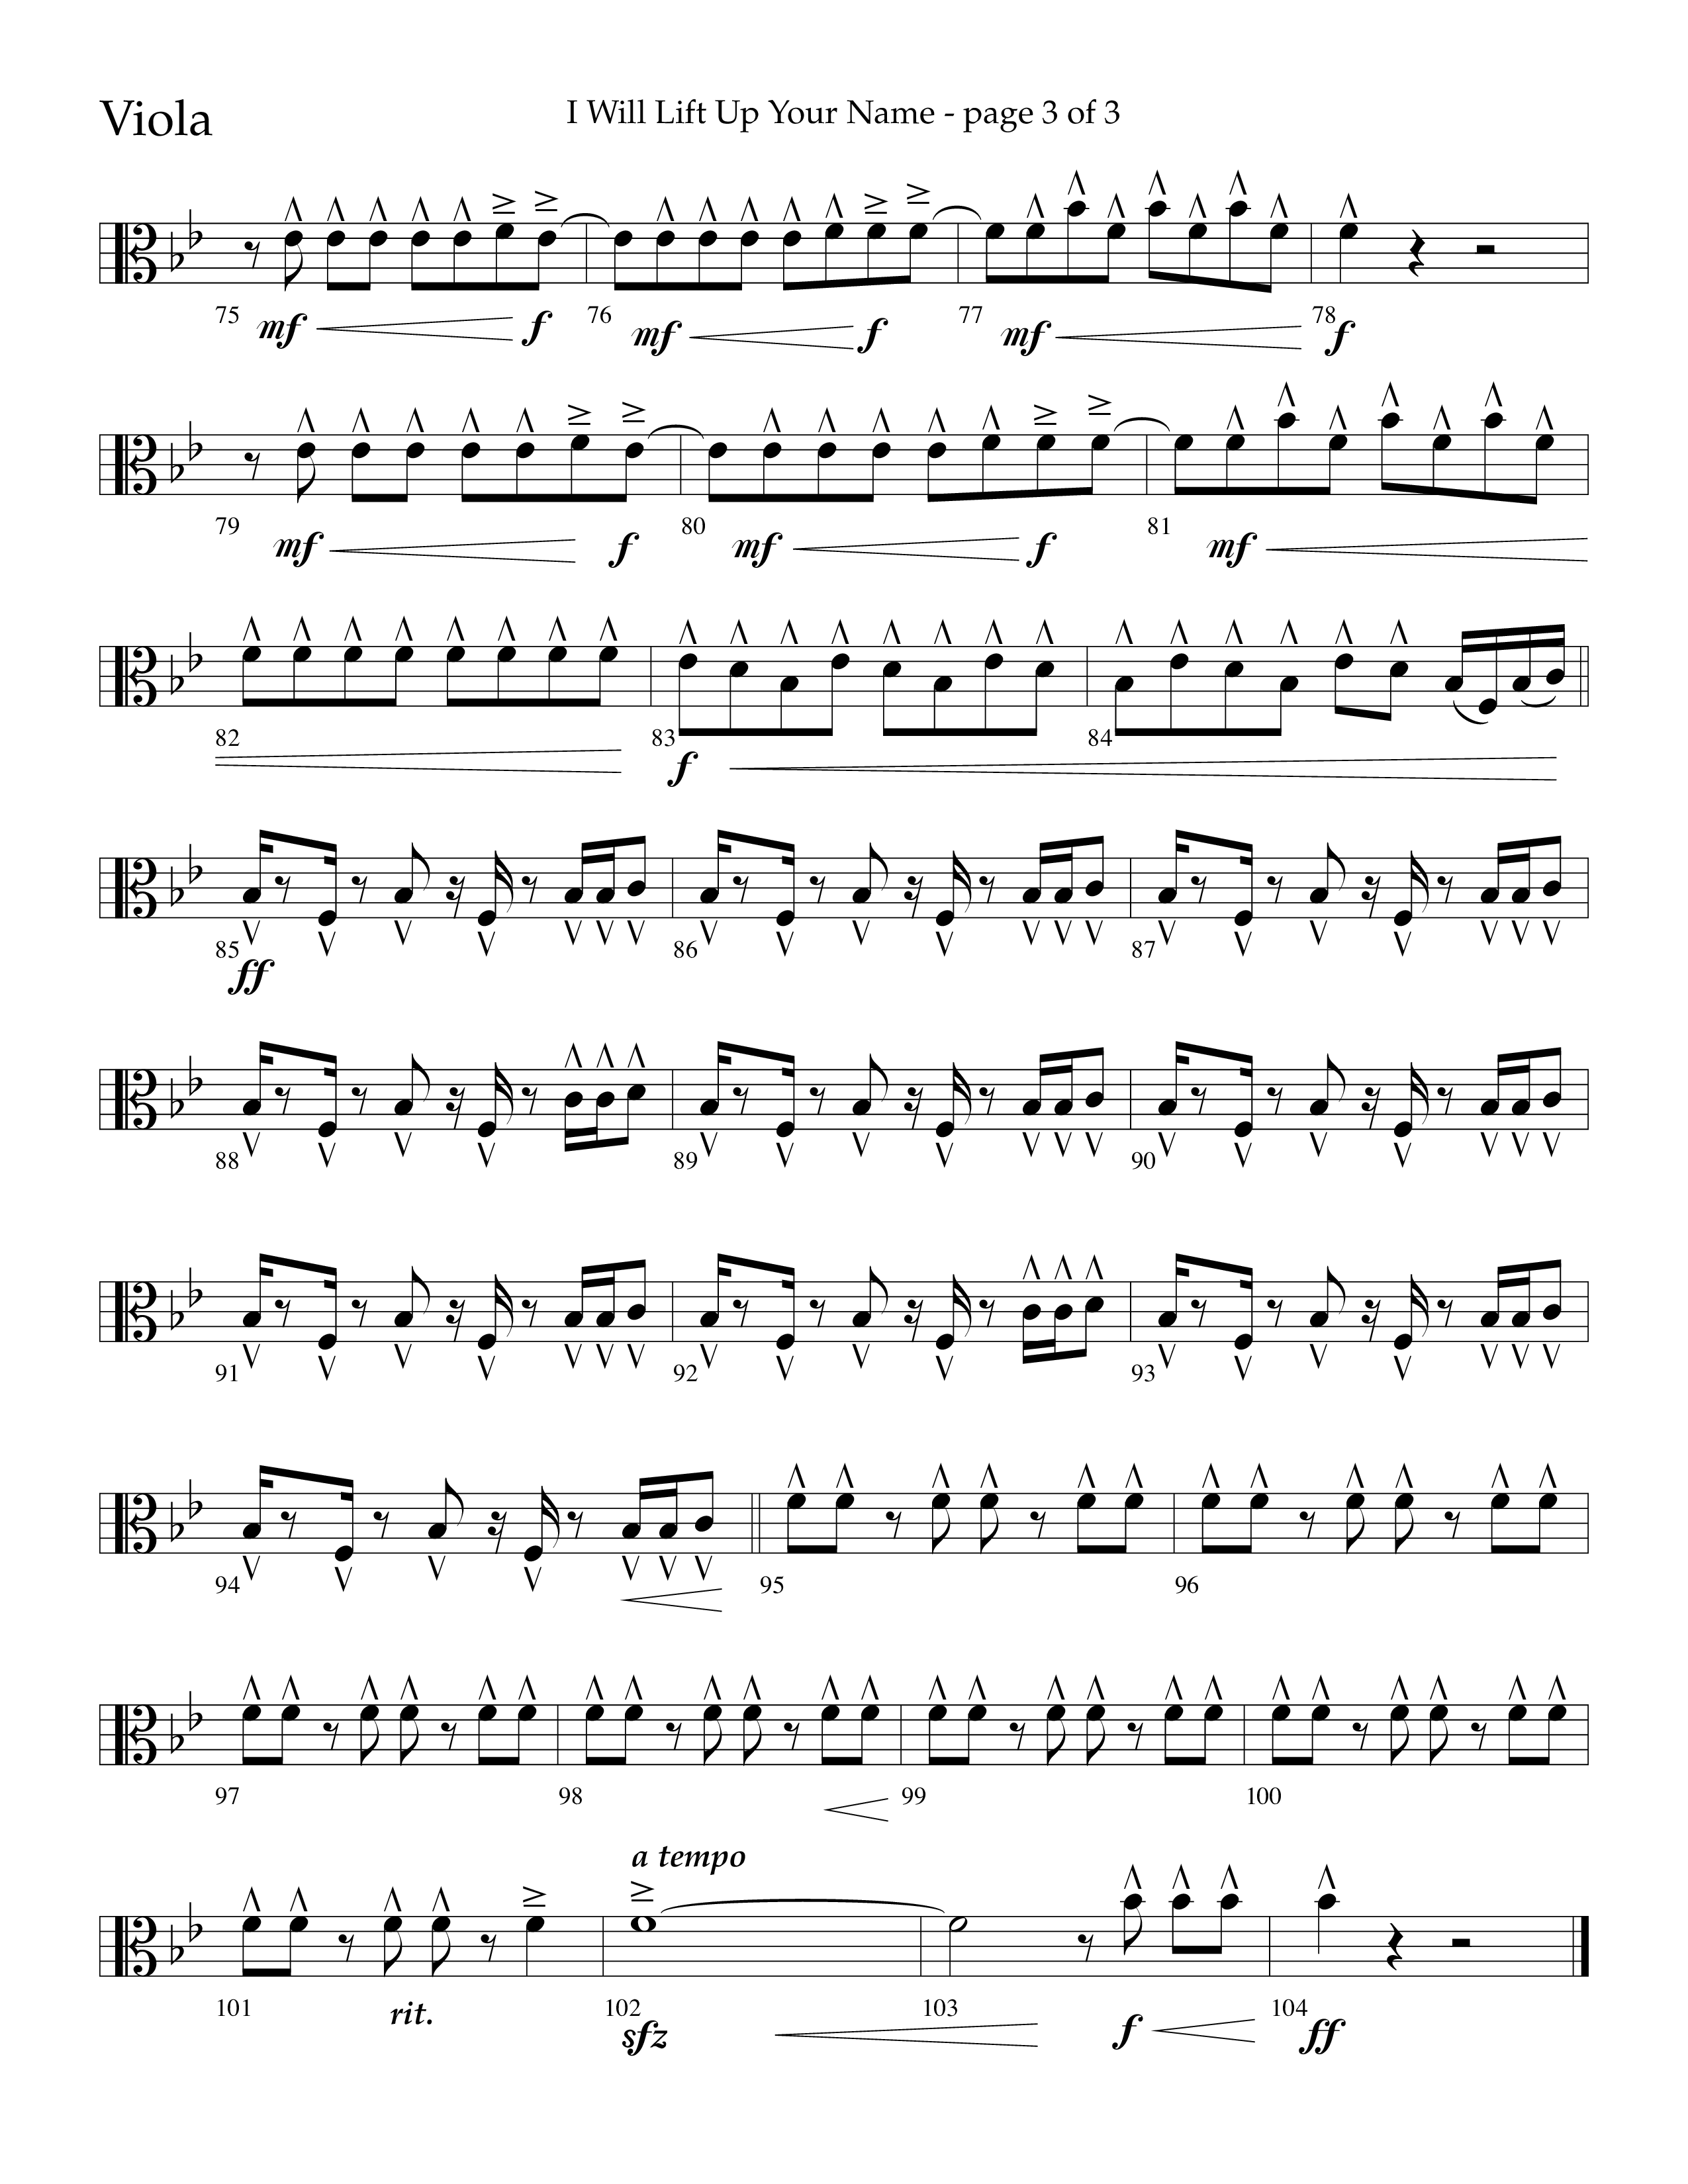 I Will Lift Up Your Name (Choral Anthem SATB) Viola (Lifeway Choral / Arr. John Bolin / Orch. Cliff Duren)